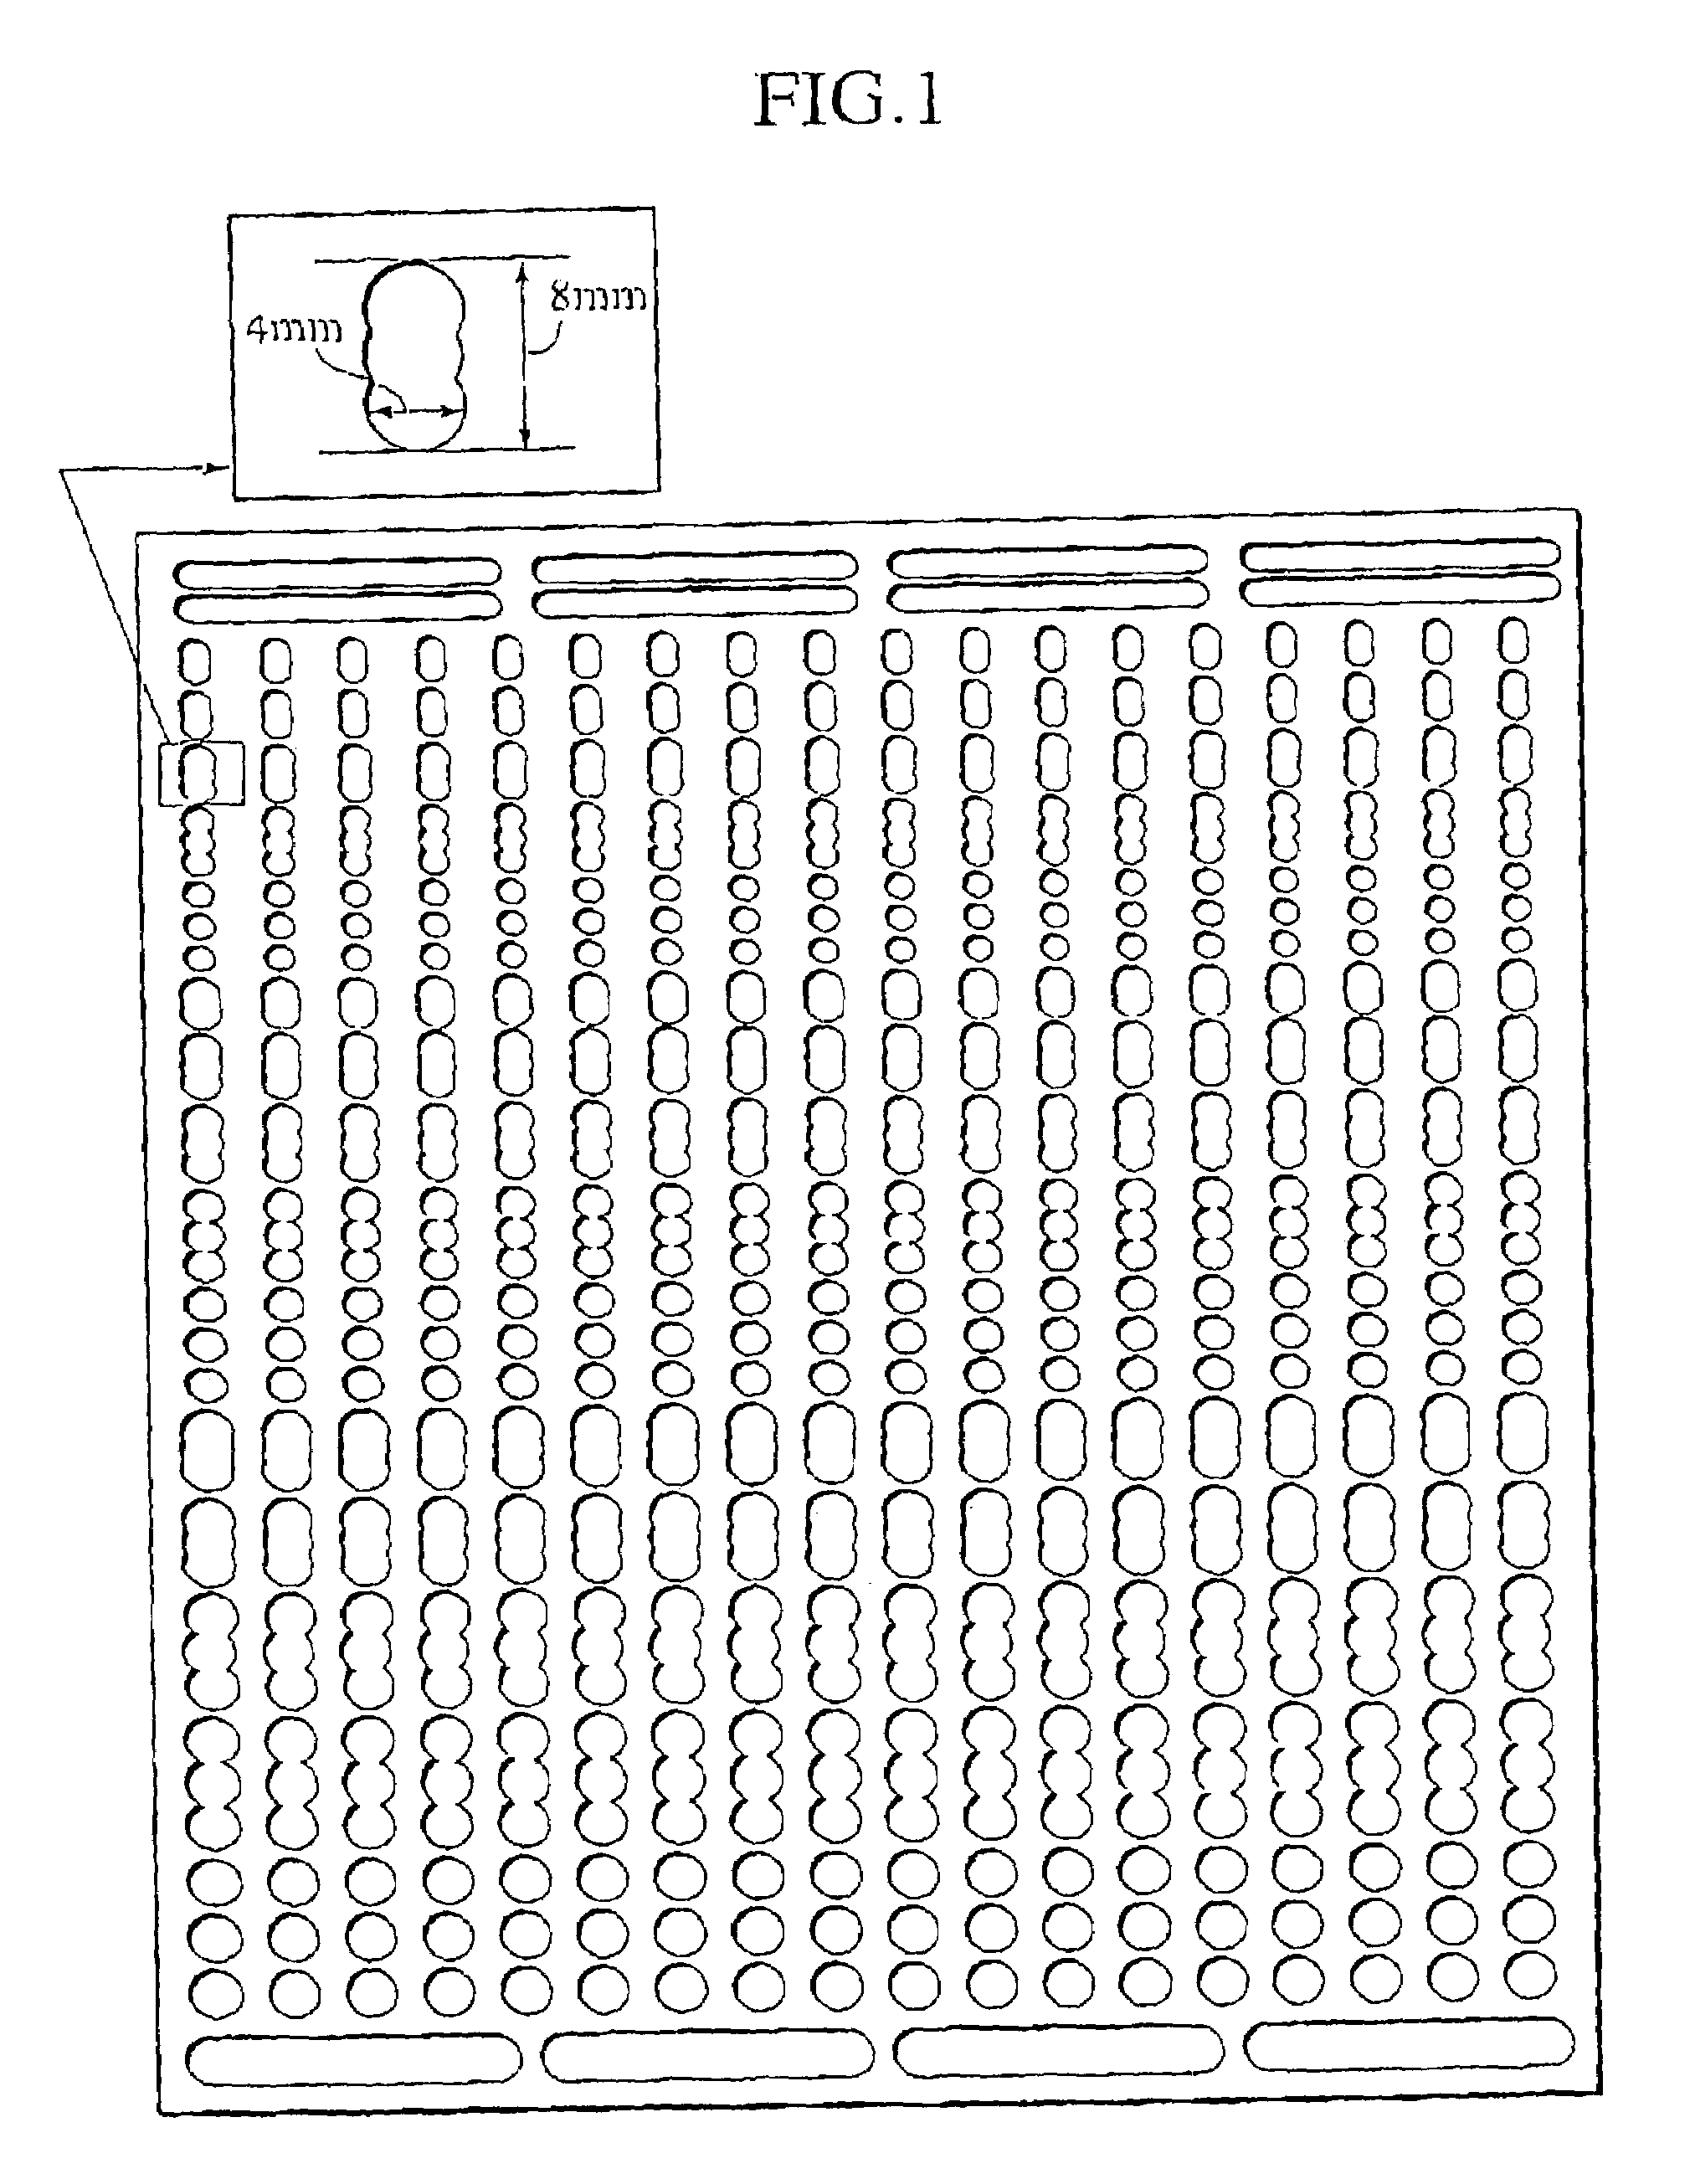 Photosensitive resin composition, photosensitive element, production method of resist pattern and production method for printed circuit board